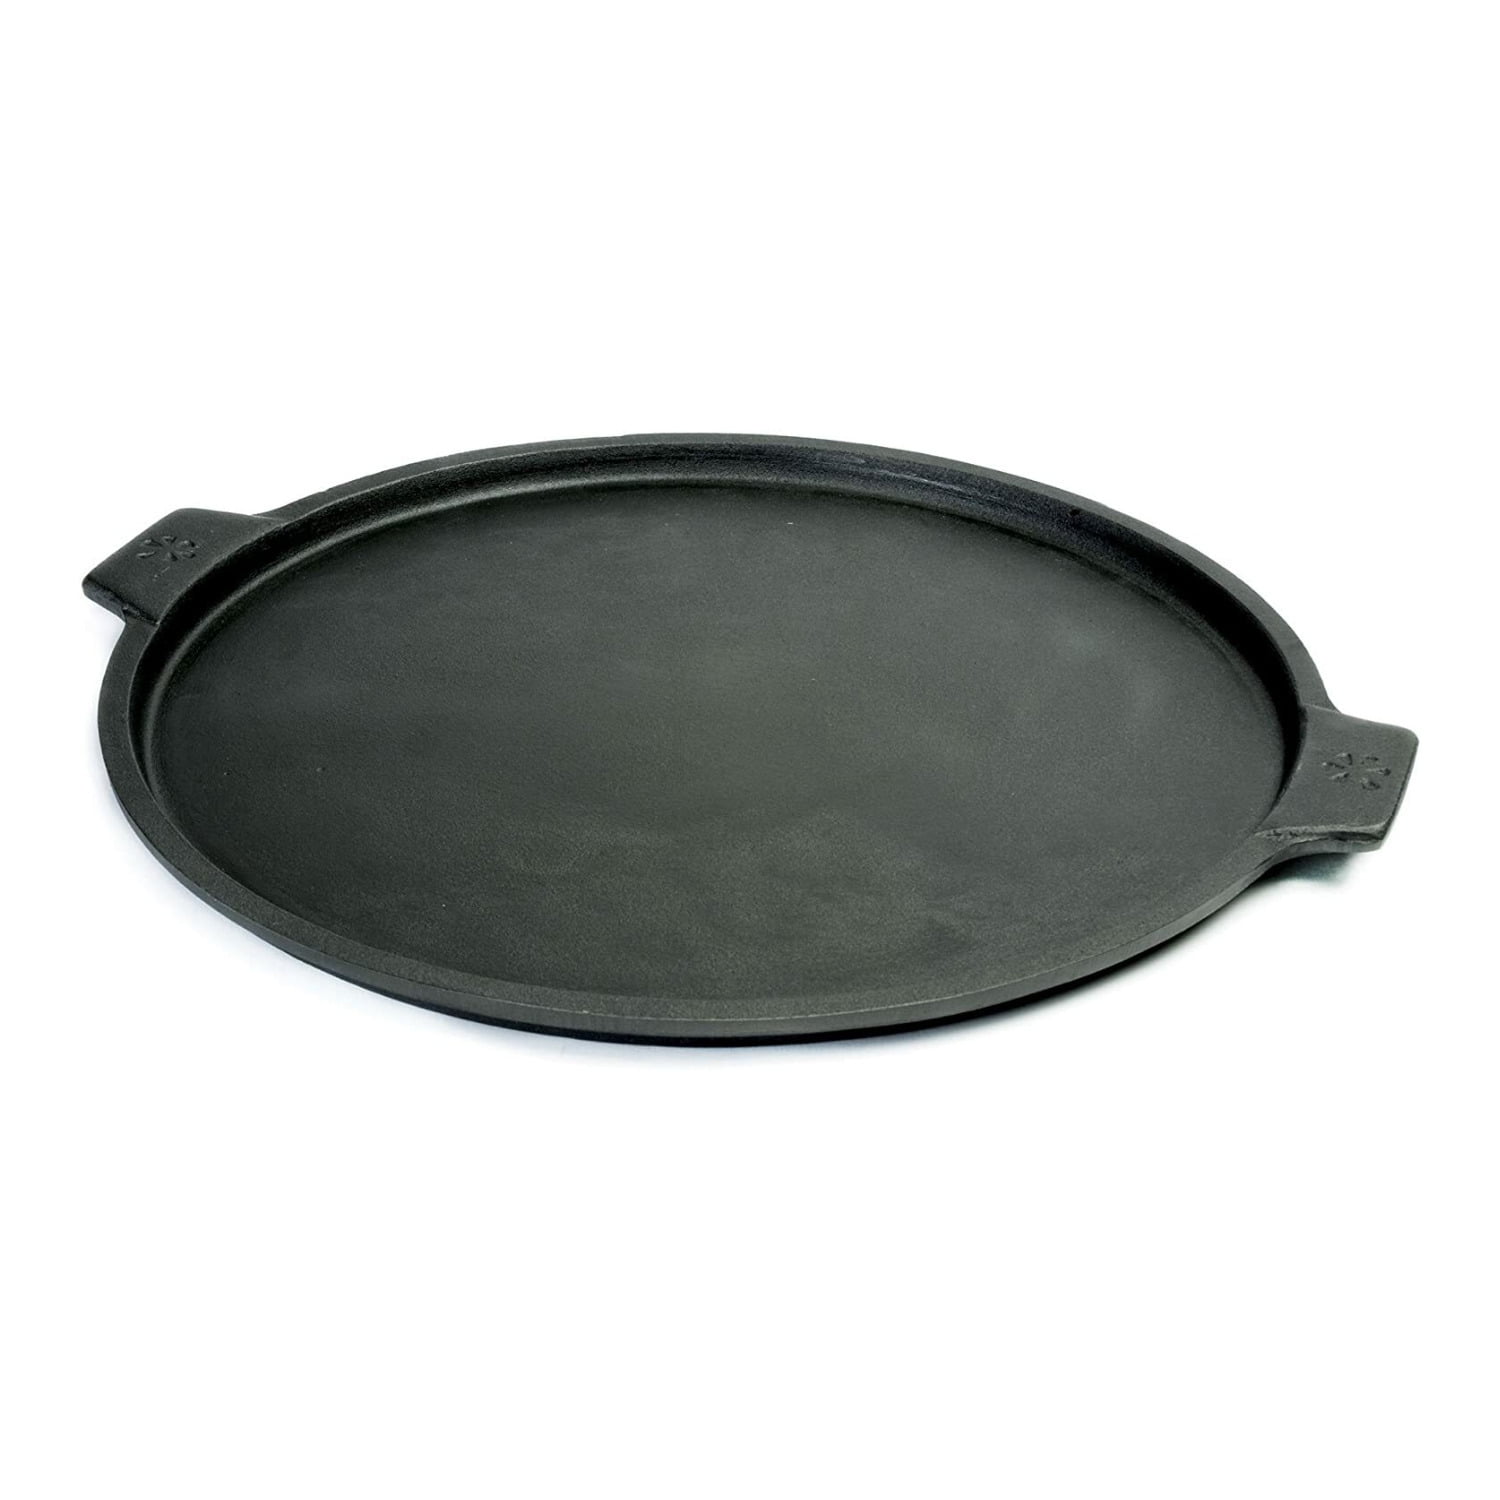 Stove Grill or Campfire Enhanced Heat Retention and Dispersion 13.5 Inch Oven Pre-Seasoned Cast Iron Pizza and Baking Pan Natural Finish 